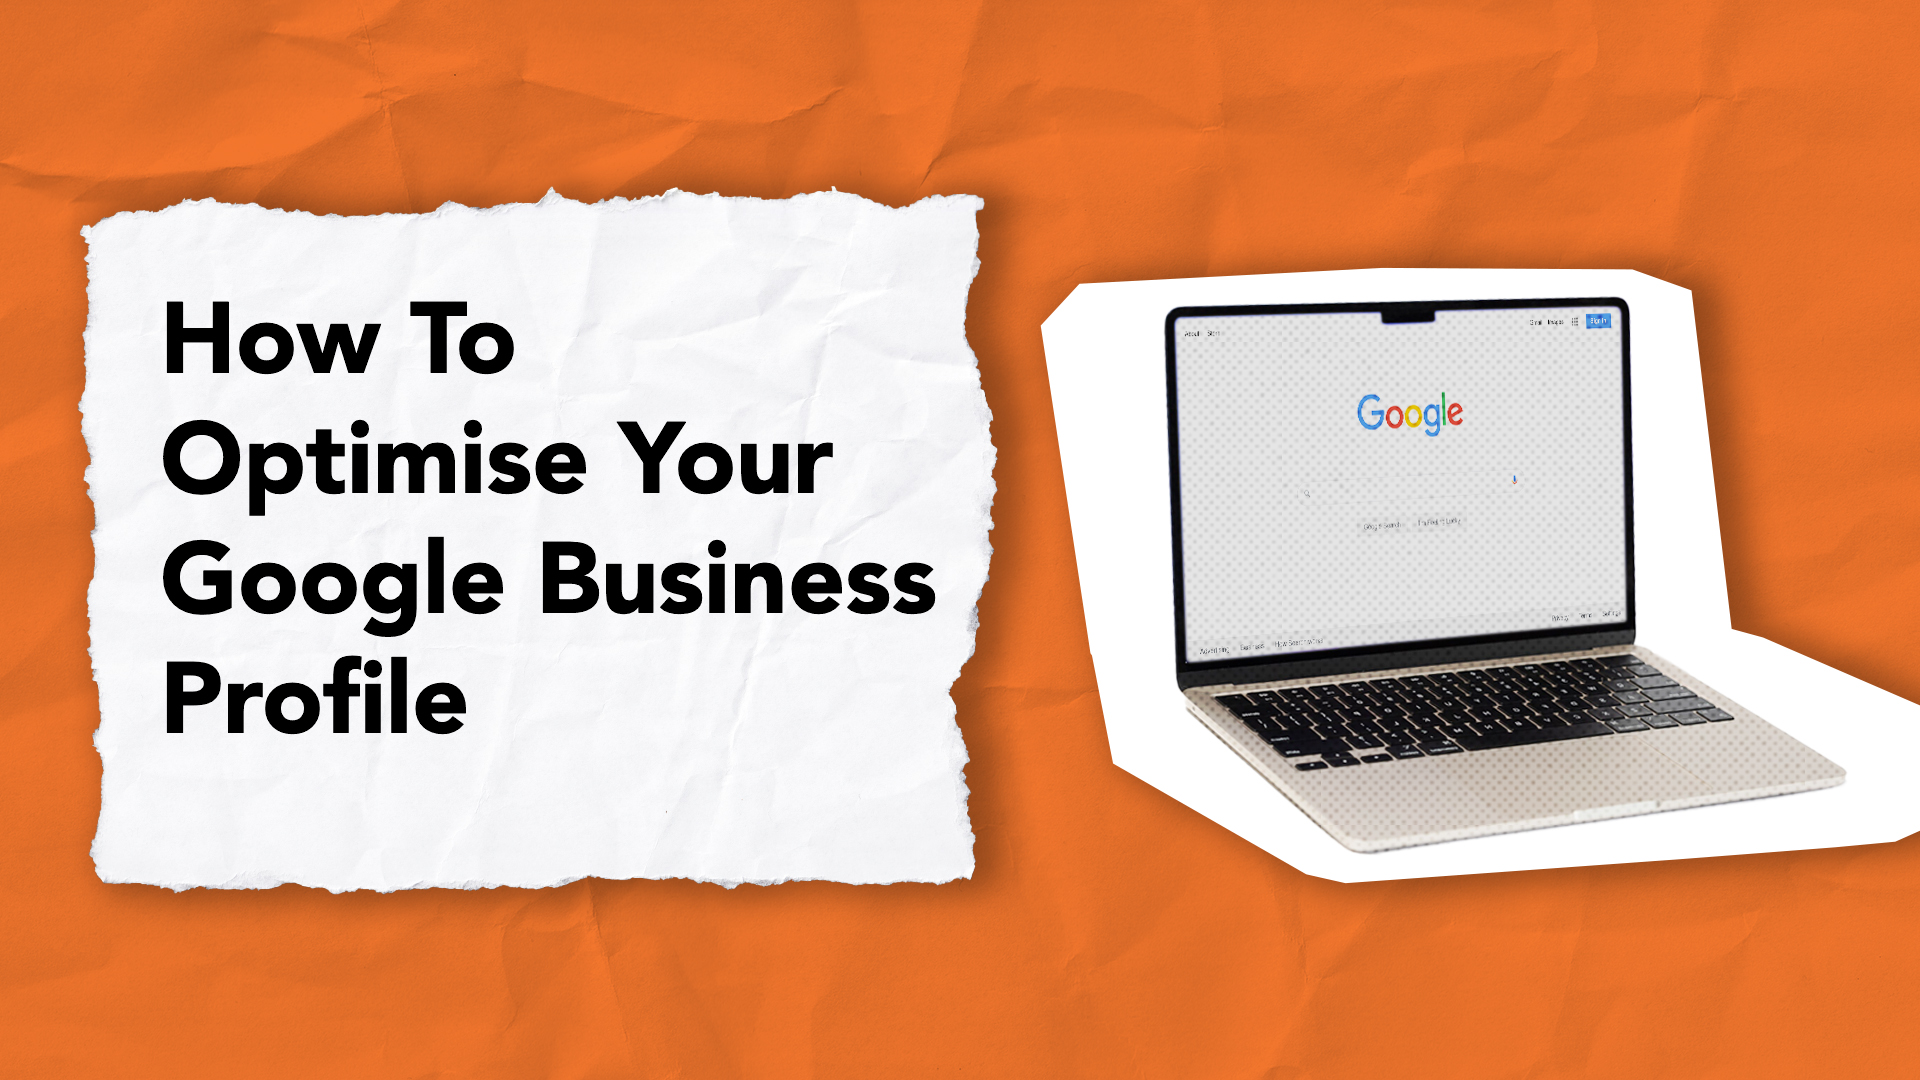 How to optimise your Google Business Profile